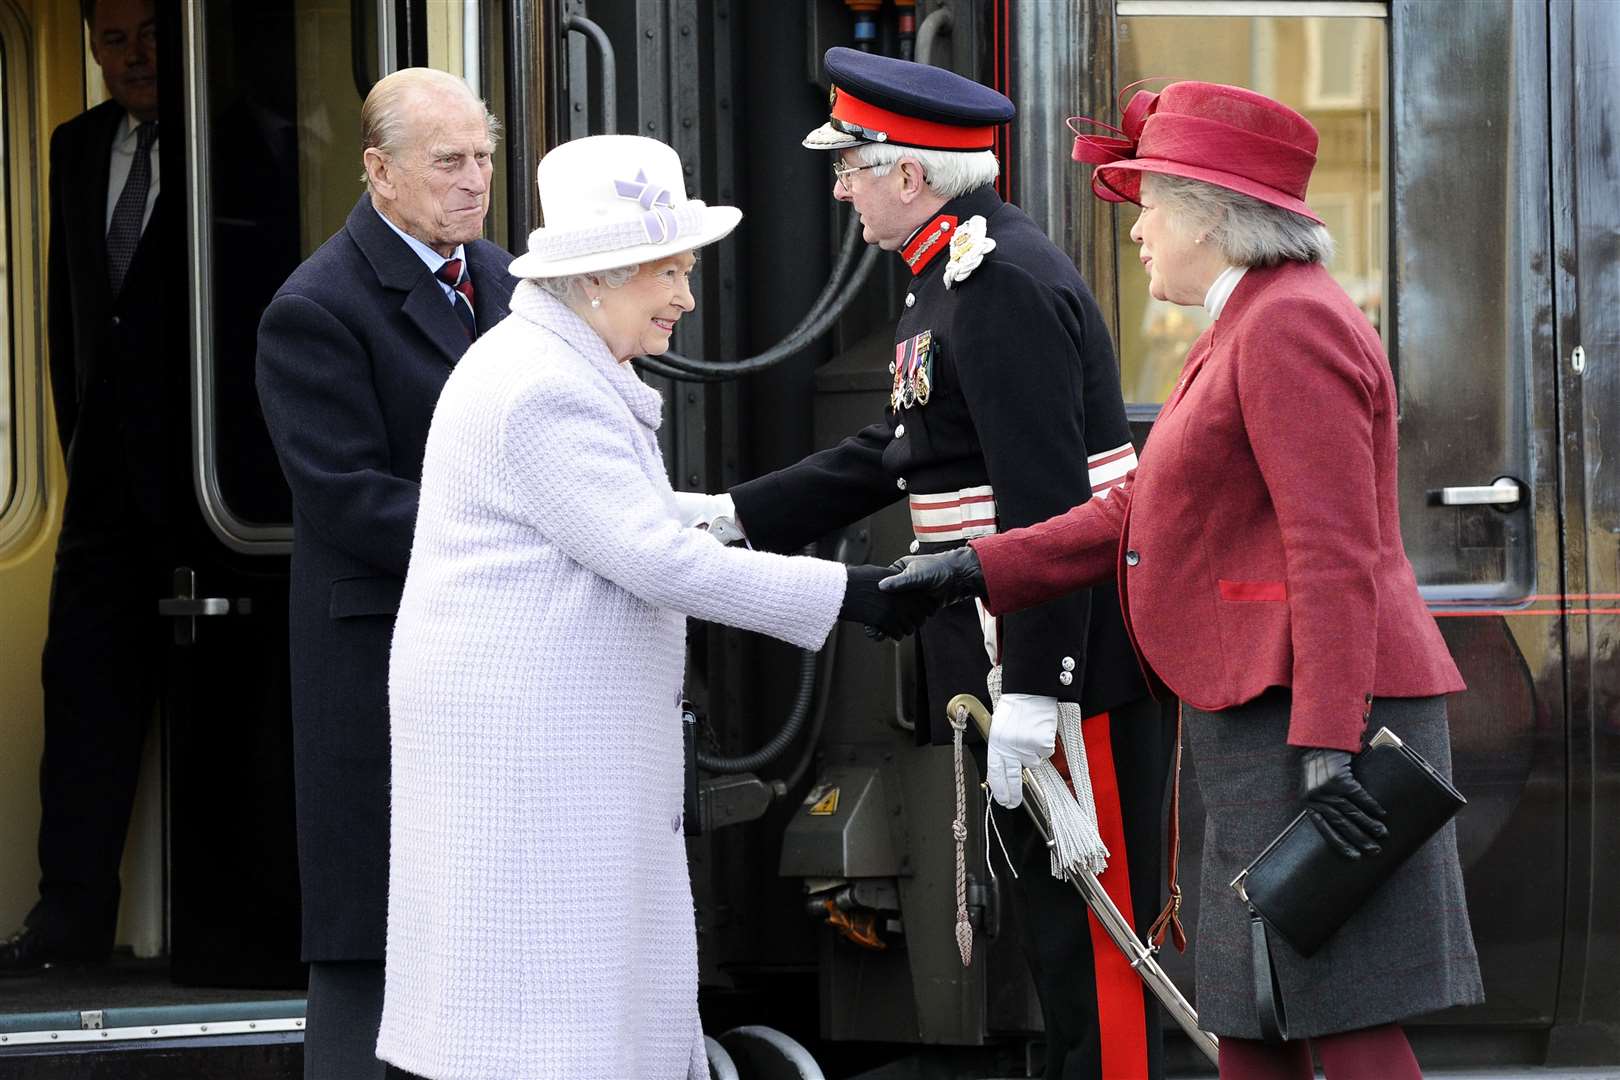 The Queen and The Duke of Edinburgh during a visit to the north of Scotland.